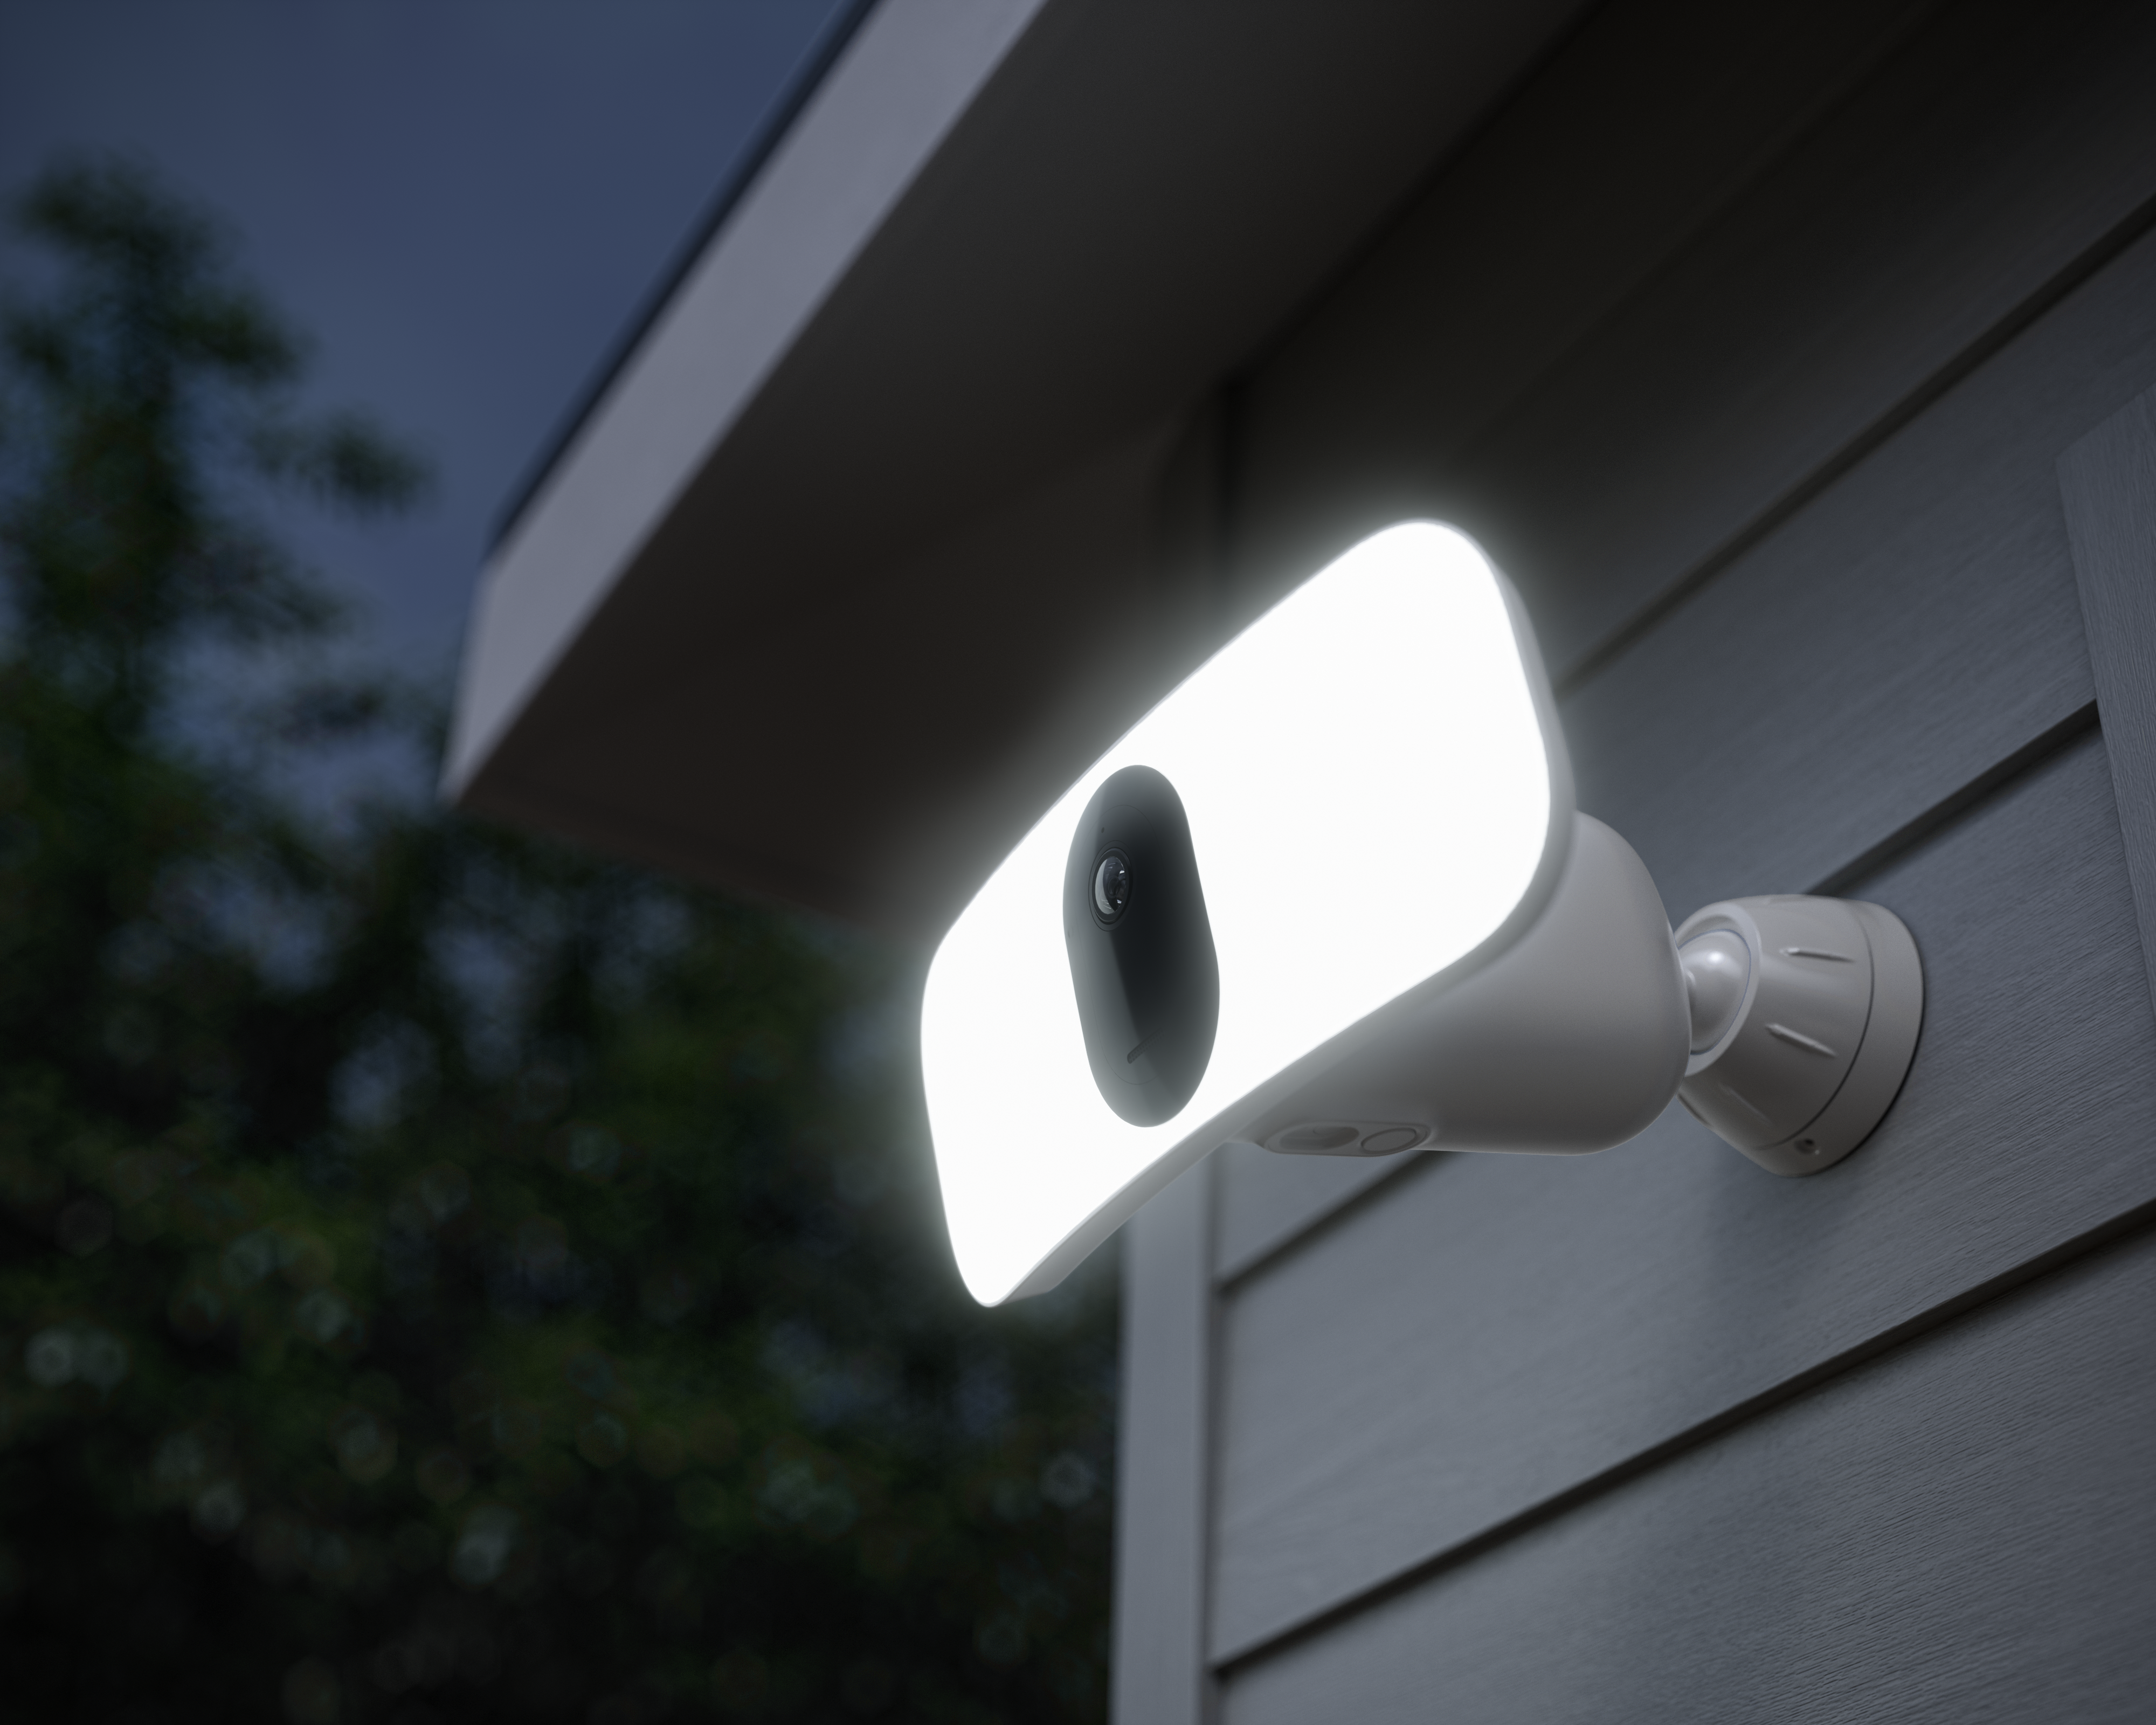 Arlo Pro 3 Floodlight Camera Review: It Doesn't Get Much Better Than This